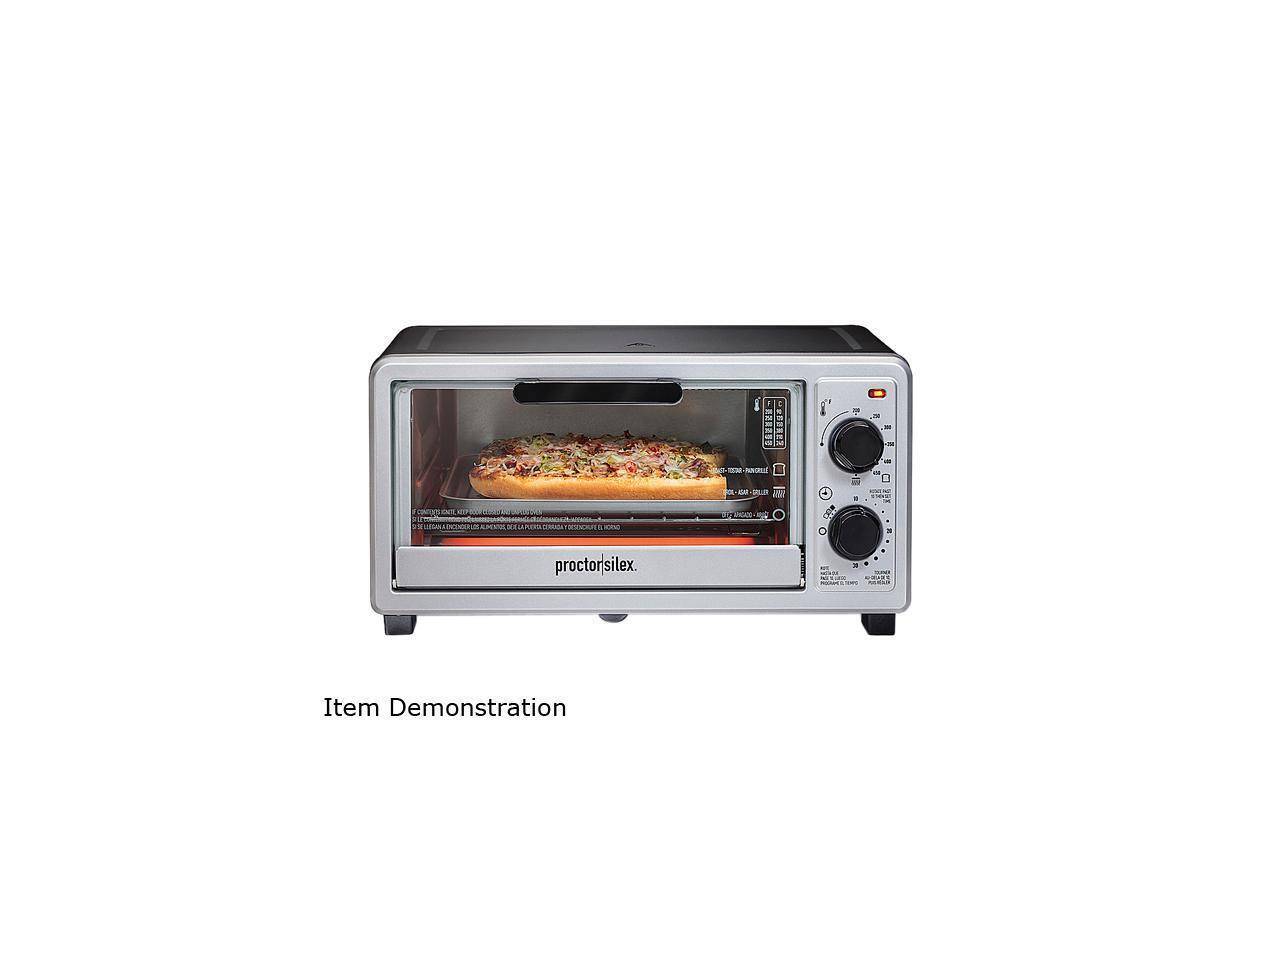 Farberware Brand 25L 6-Slice Toaster Oven with Air Fry, French Door,  FW12-100024316 